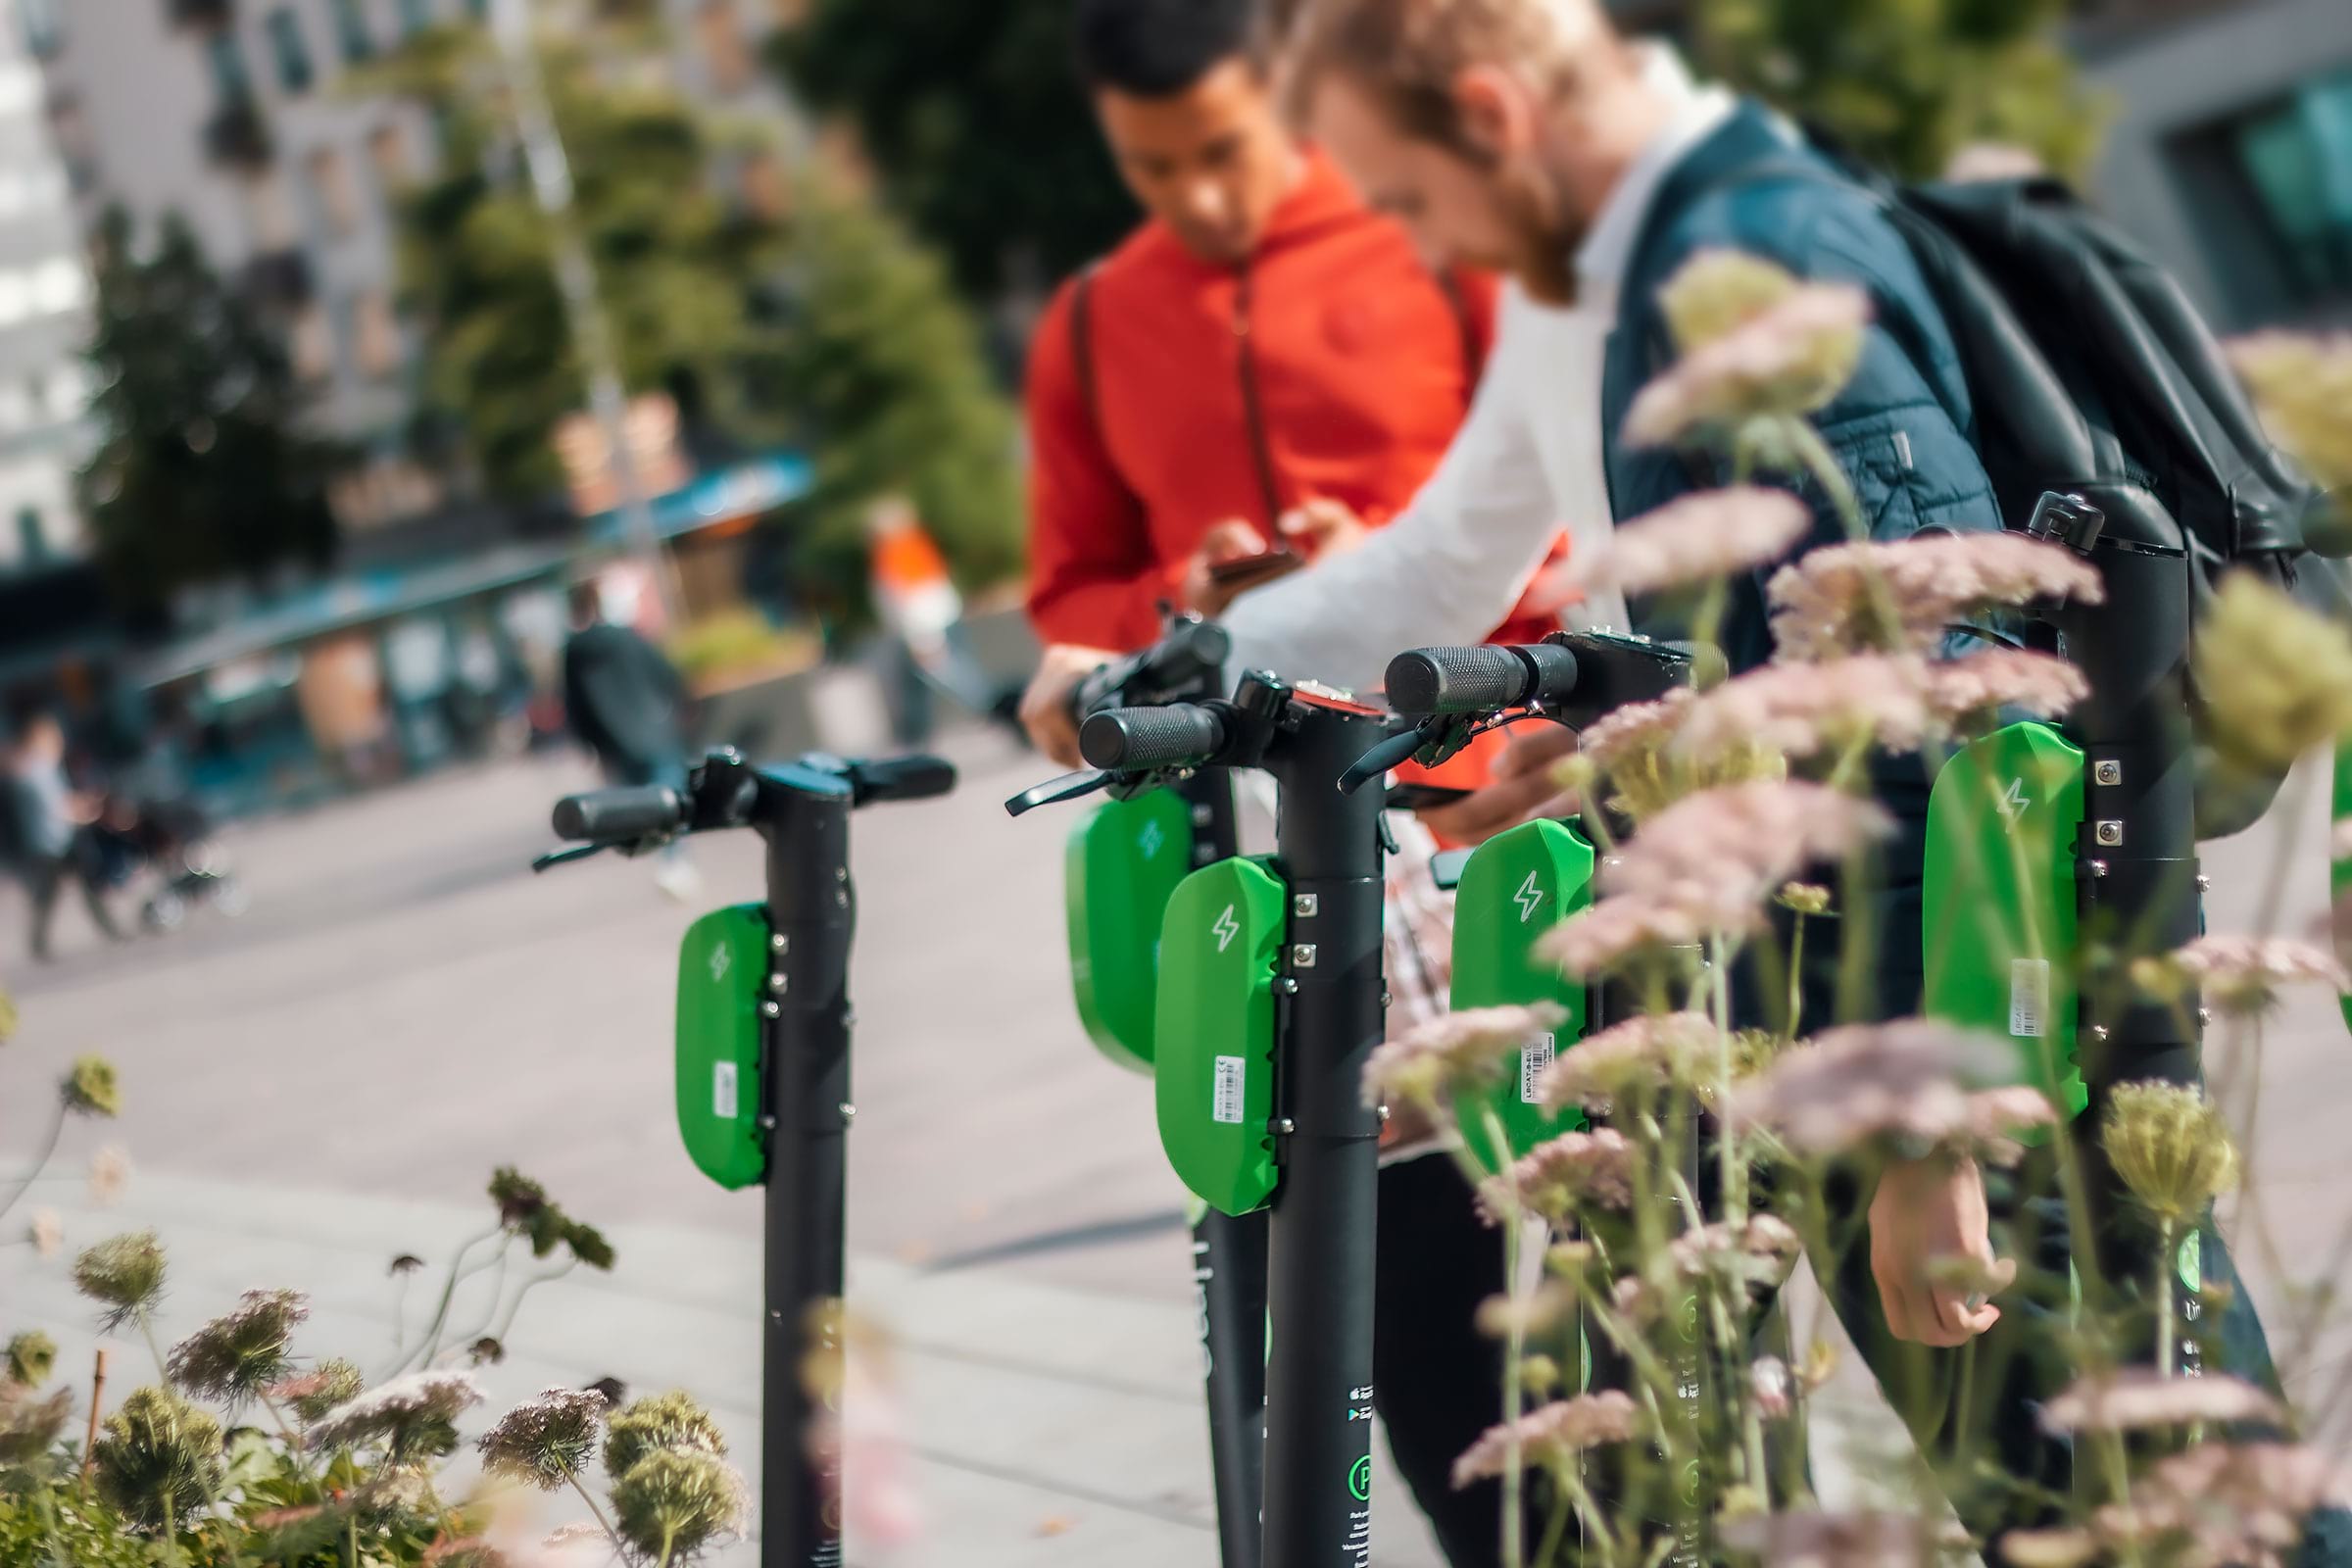 Getting around in Malmö - how to hire an electric scooter